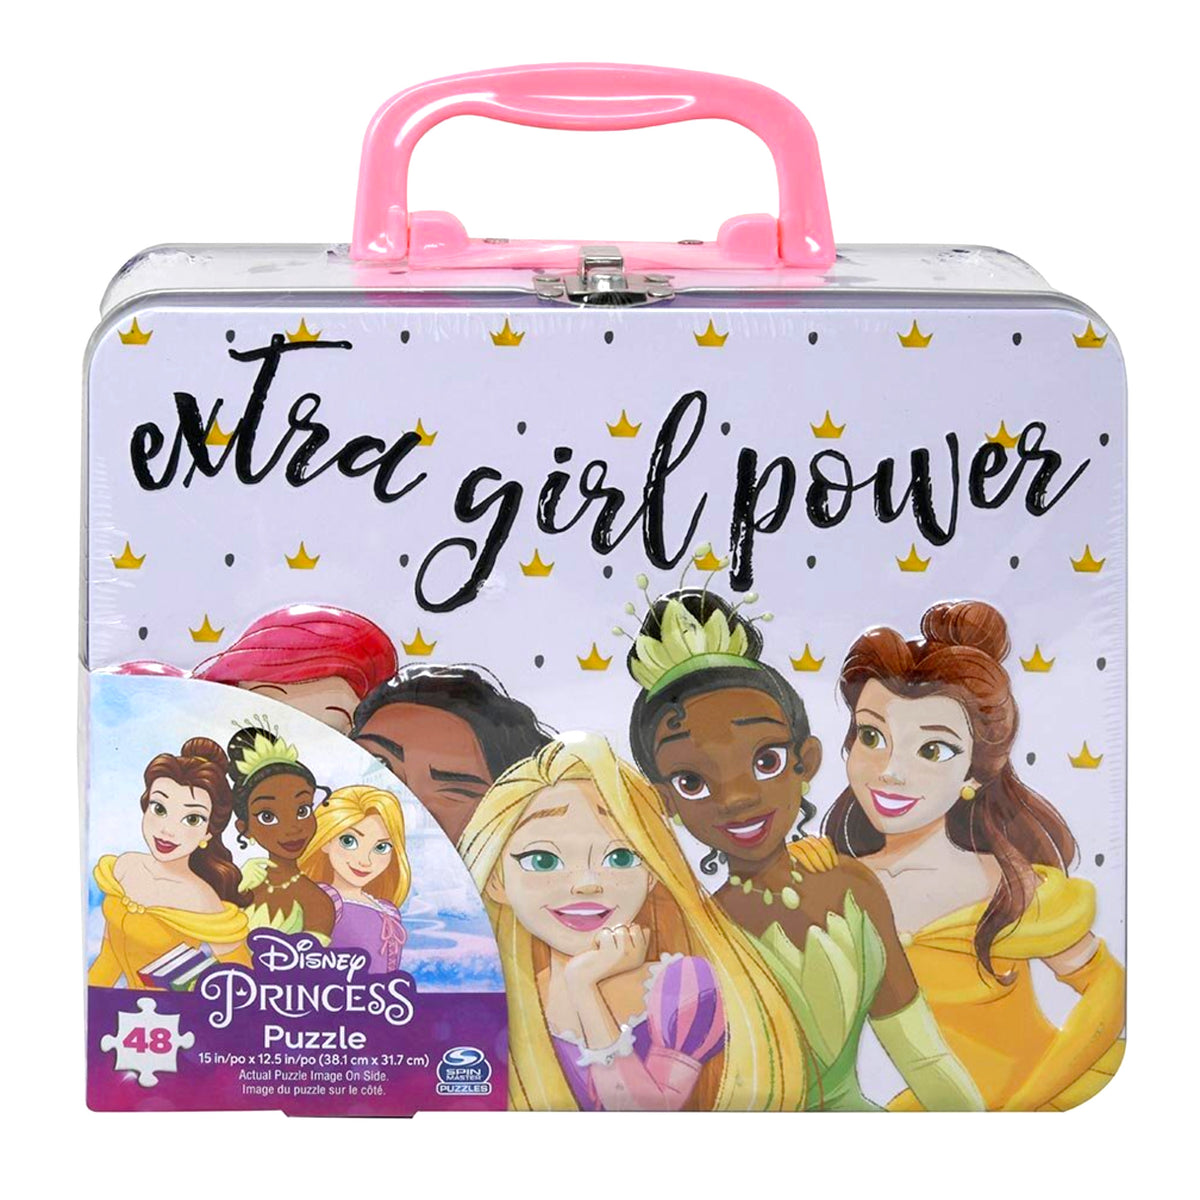 Disney Princess Tin Lunch Box with 48 Piece Puzzle